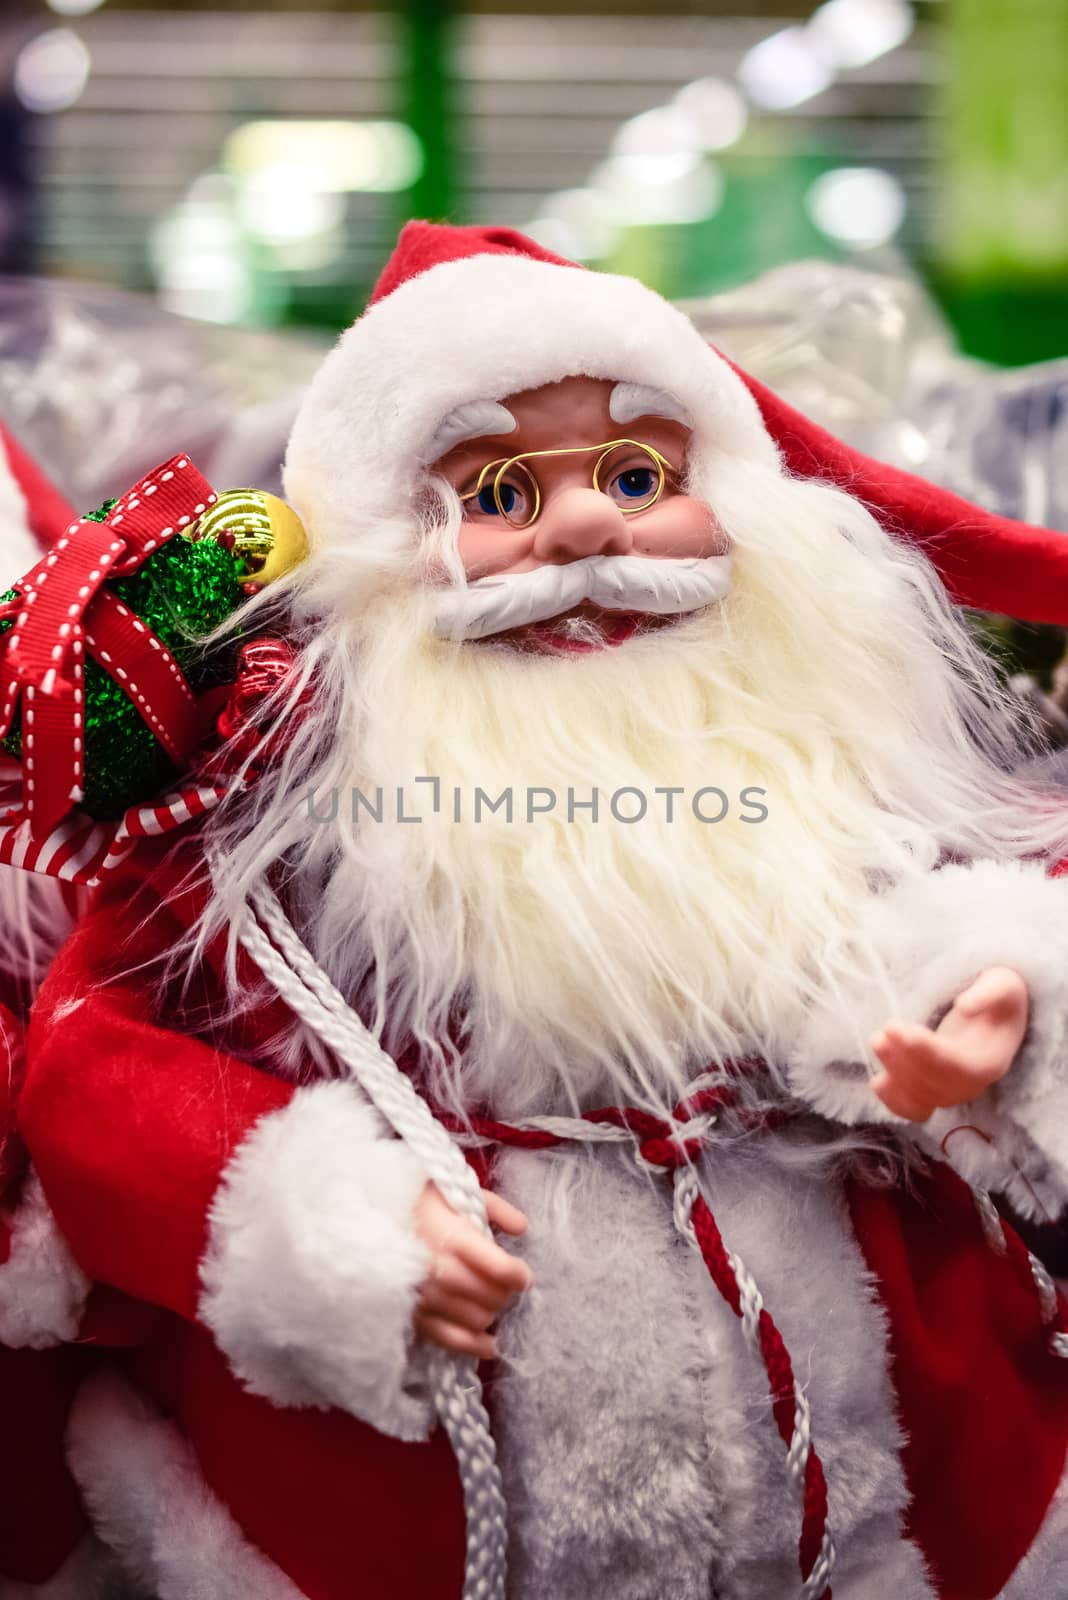 various decorations and toys for Christmas tree decoration and Christmas and new year celebration by alexandr_sorokin